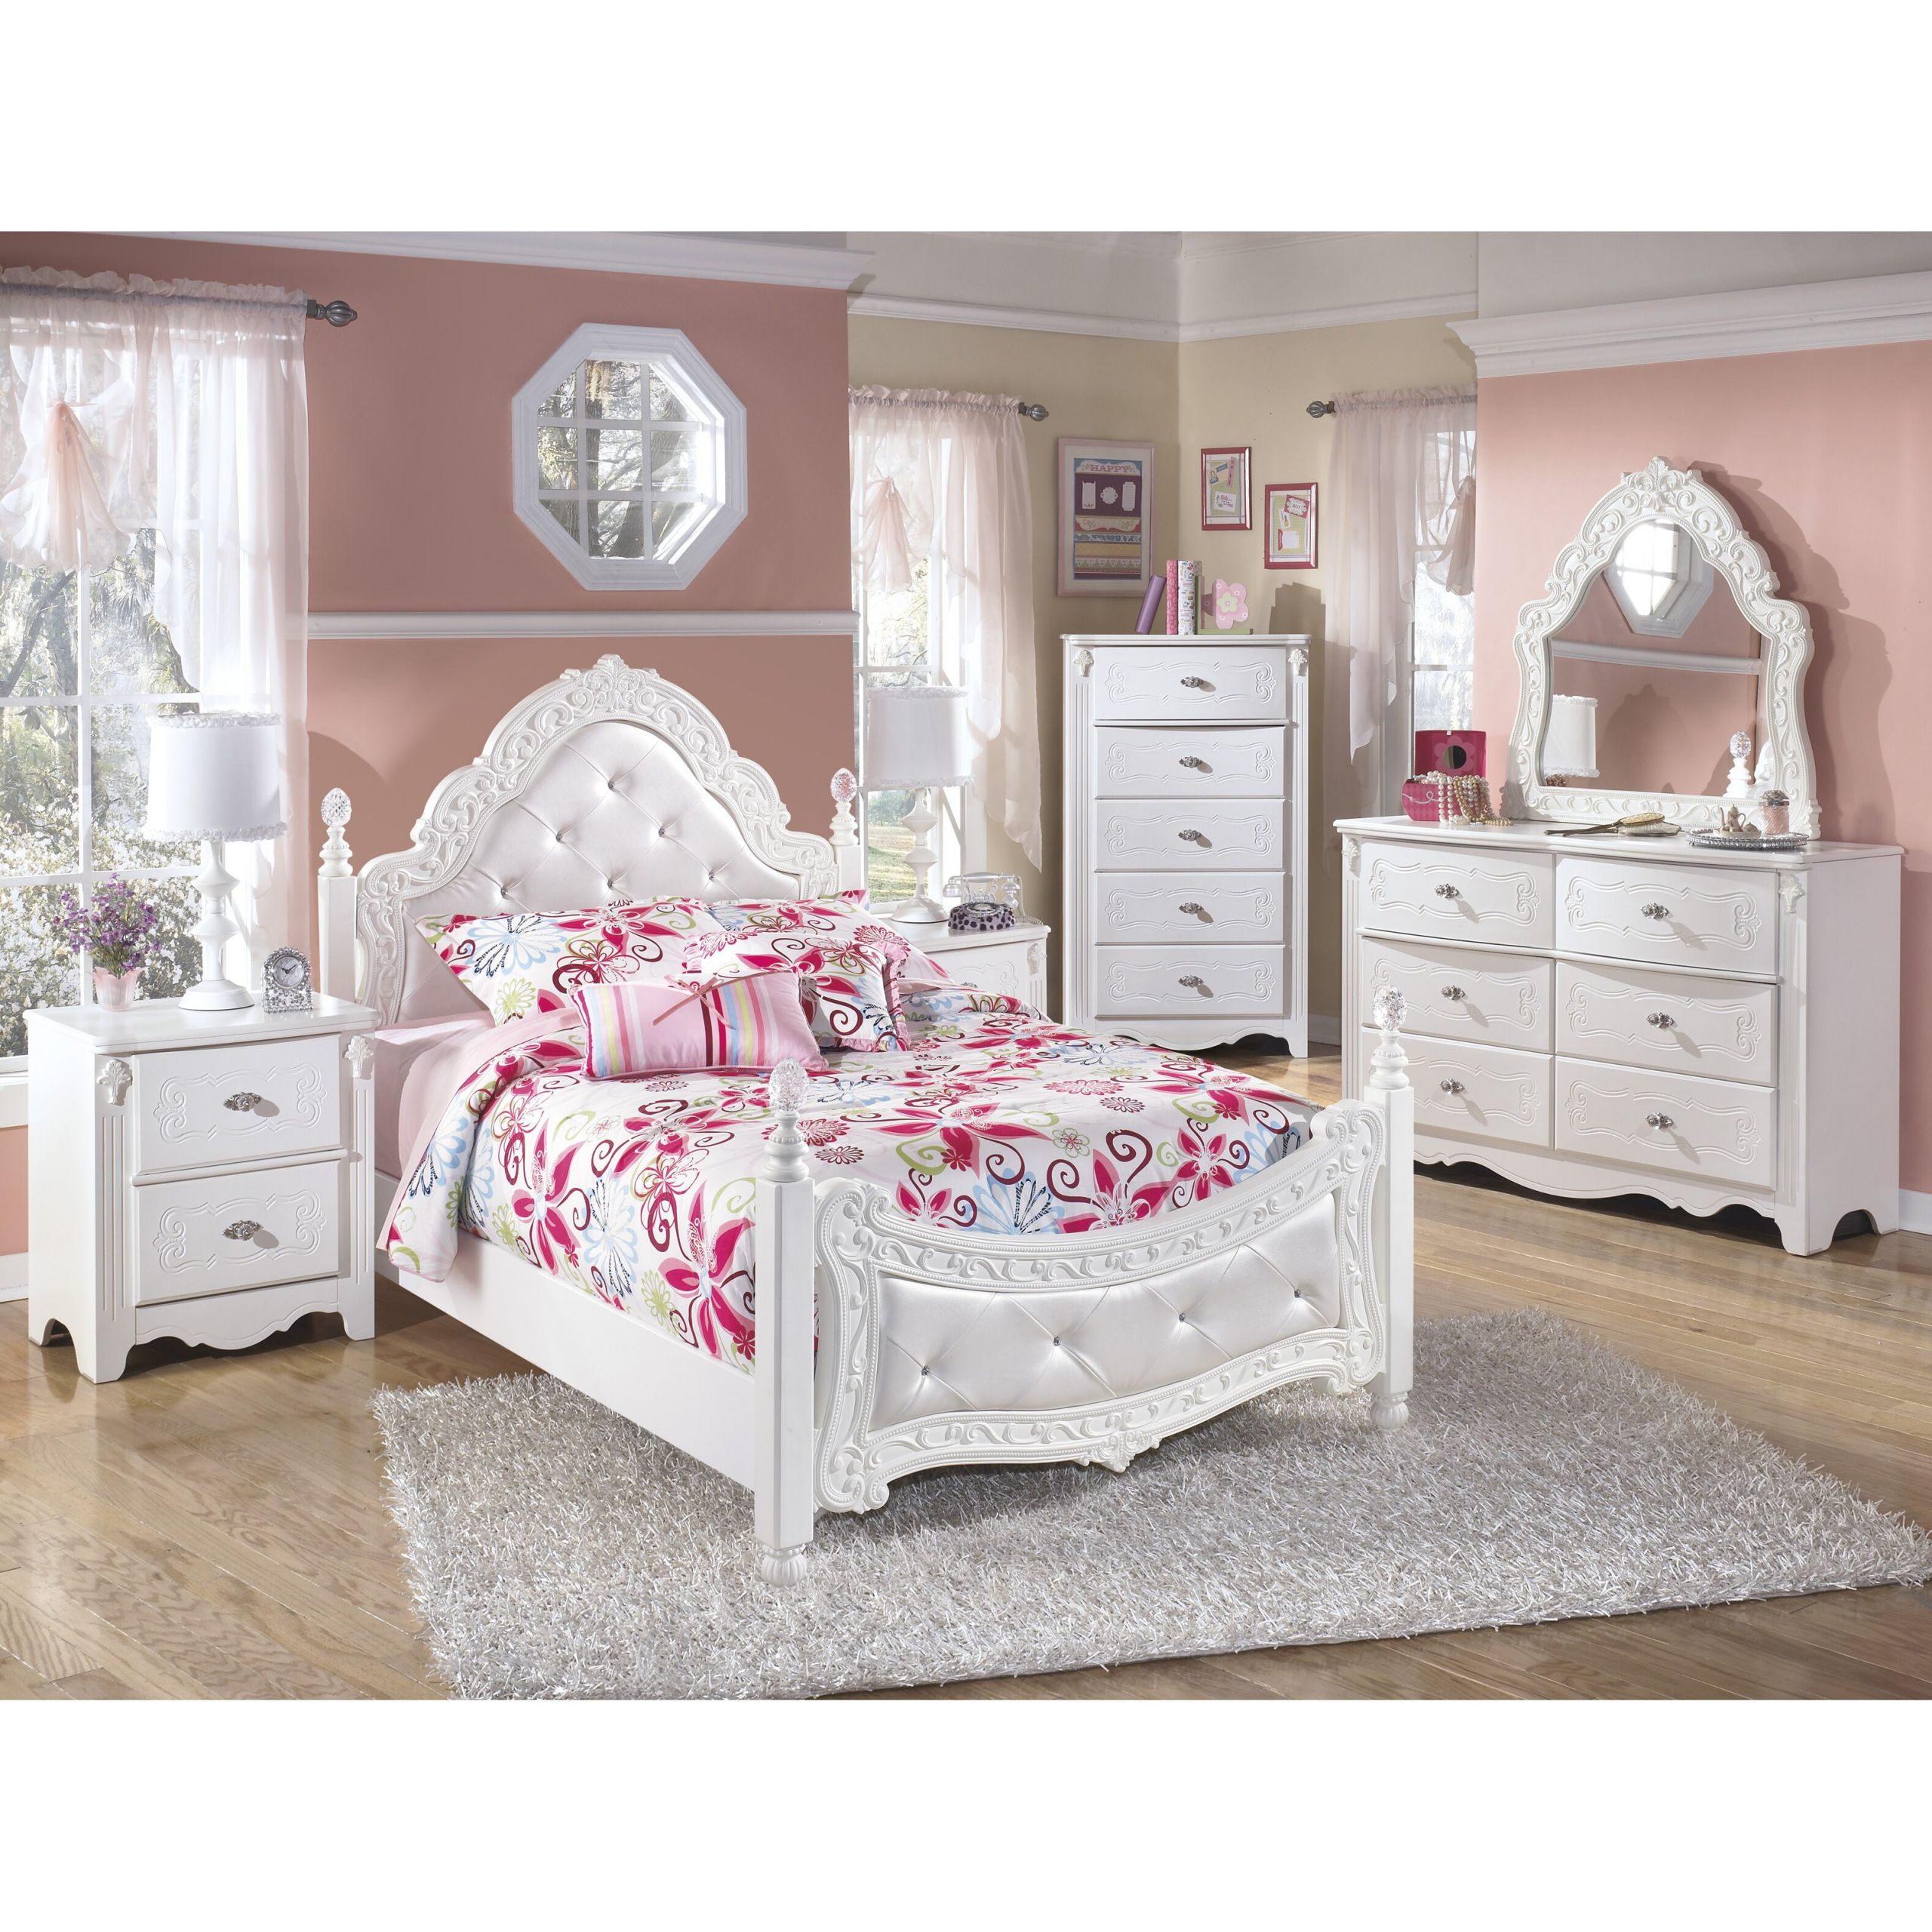 Kids Bedroom Set
 Signature Design by Ashley Exquisite Four Poster